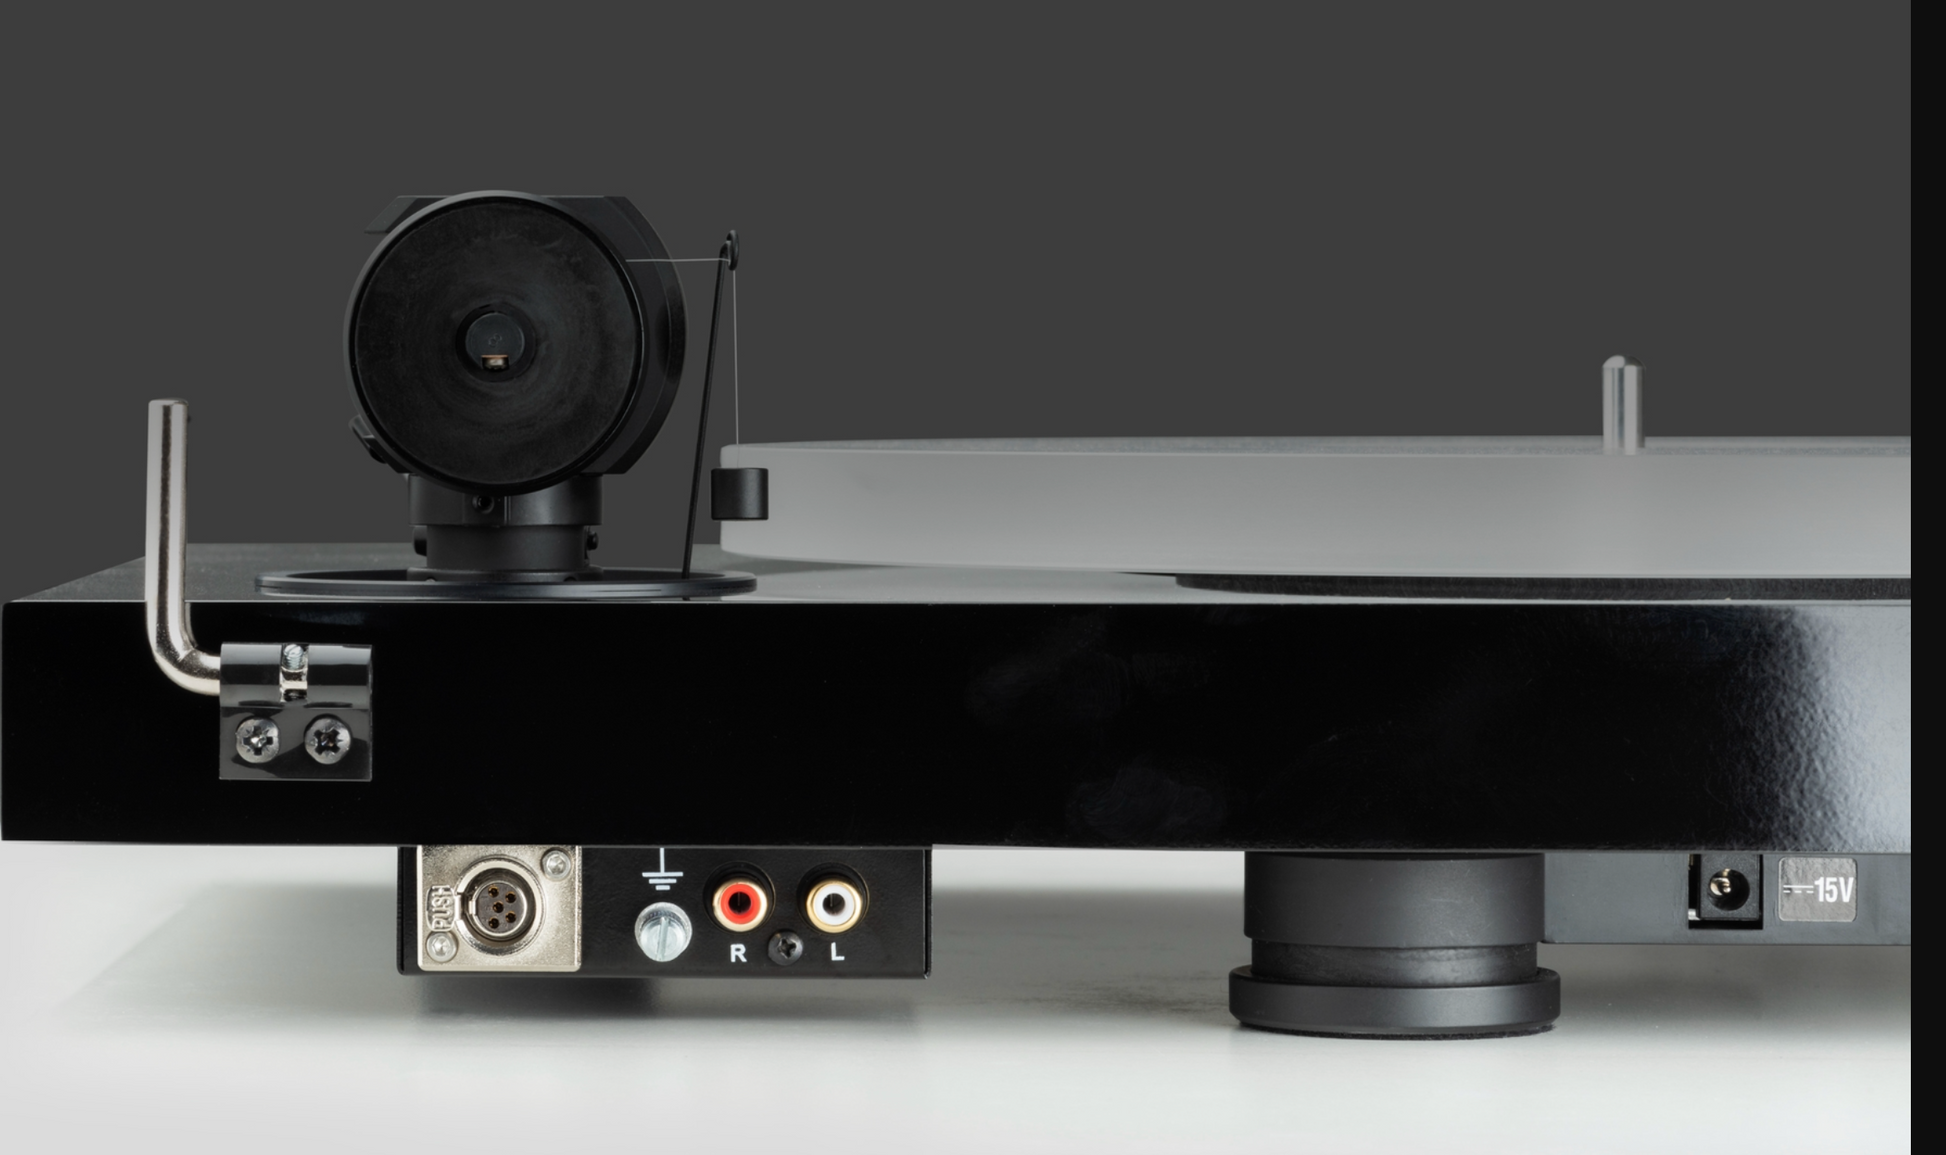 Pro-Ject X1 B Turntable with Pick It PRO Balanced Pre-Fitted image shows connection points